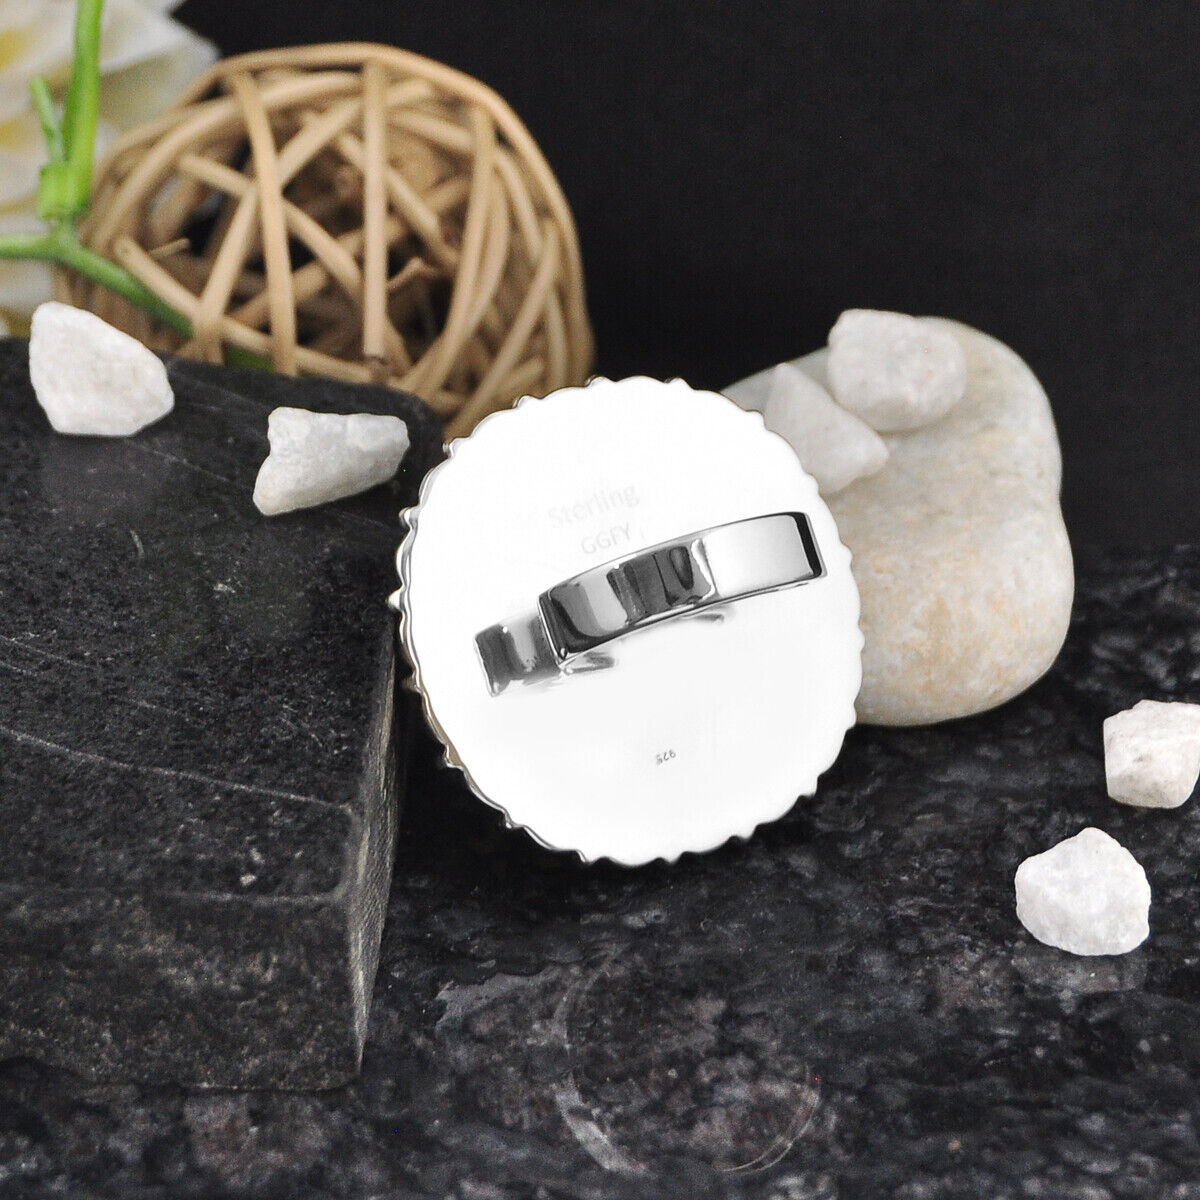 19.22cts Back Closed Natural White Wild Horse Magnesite Silver Ring Size 8 4756